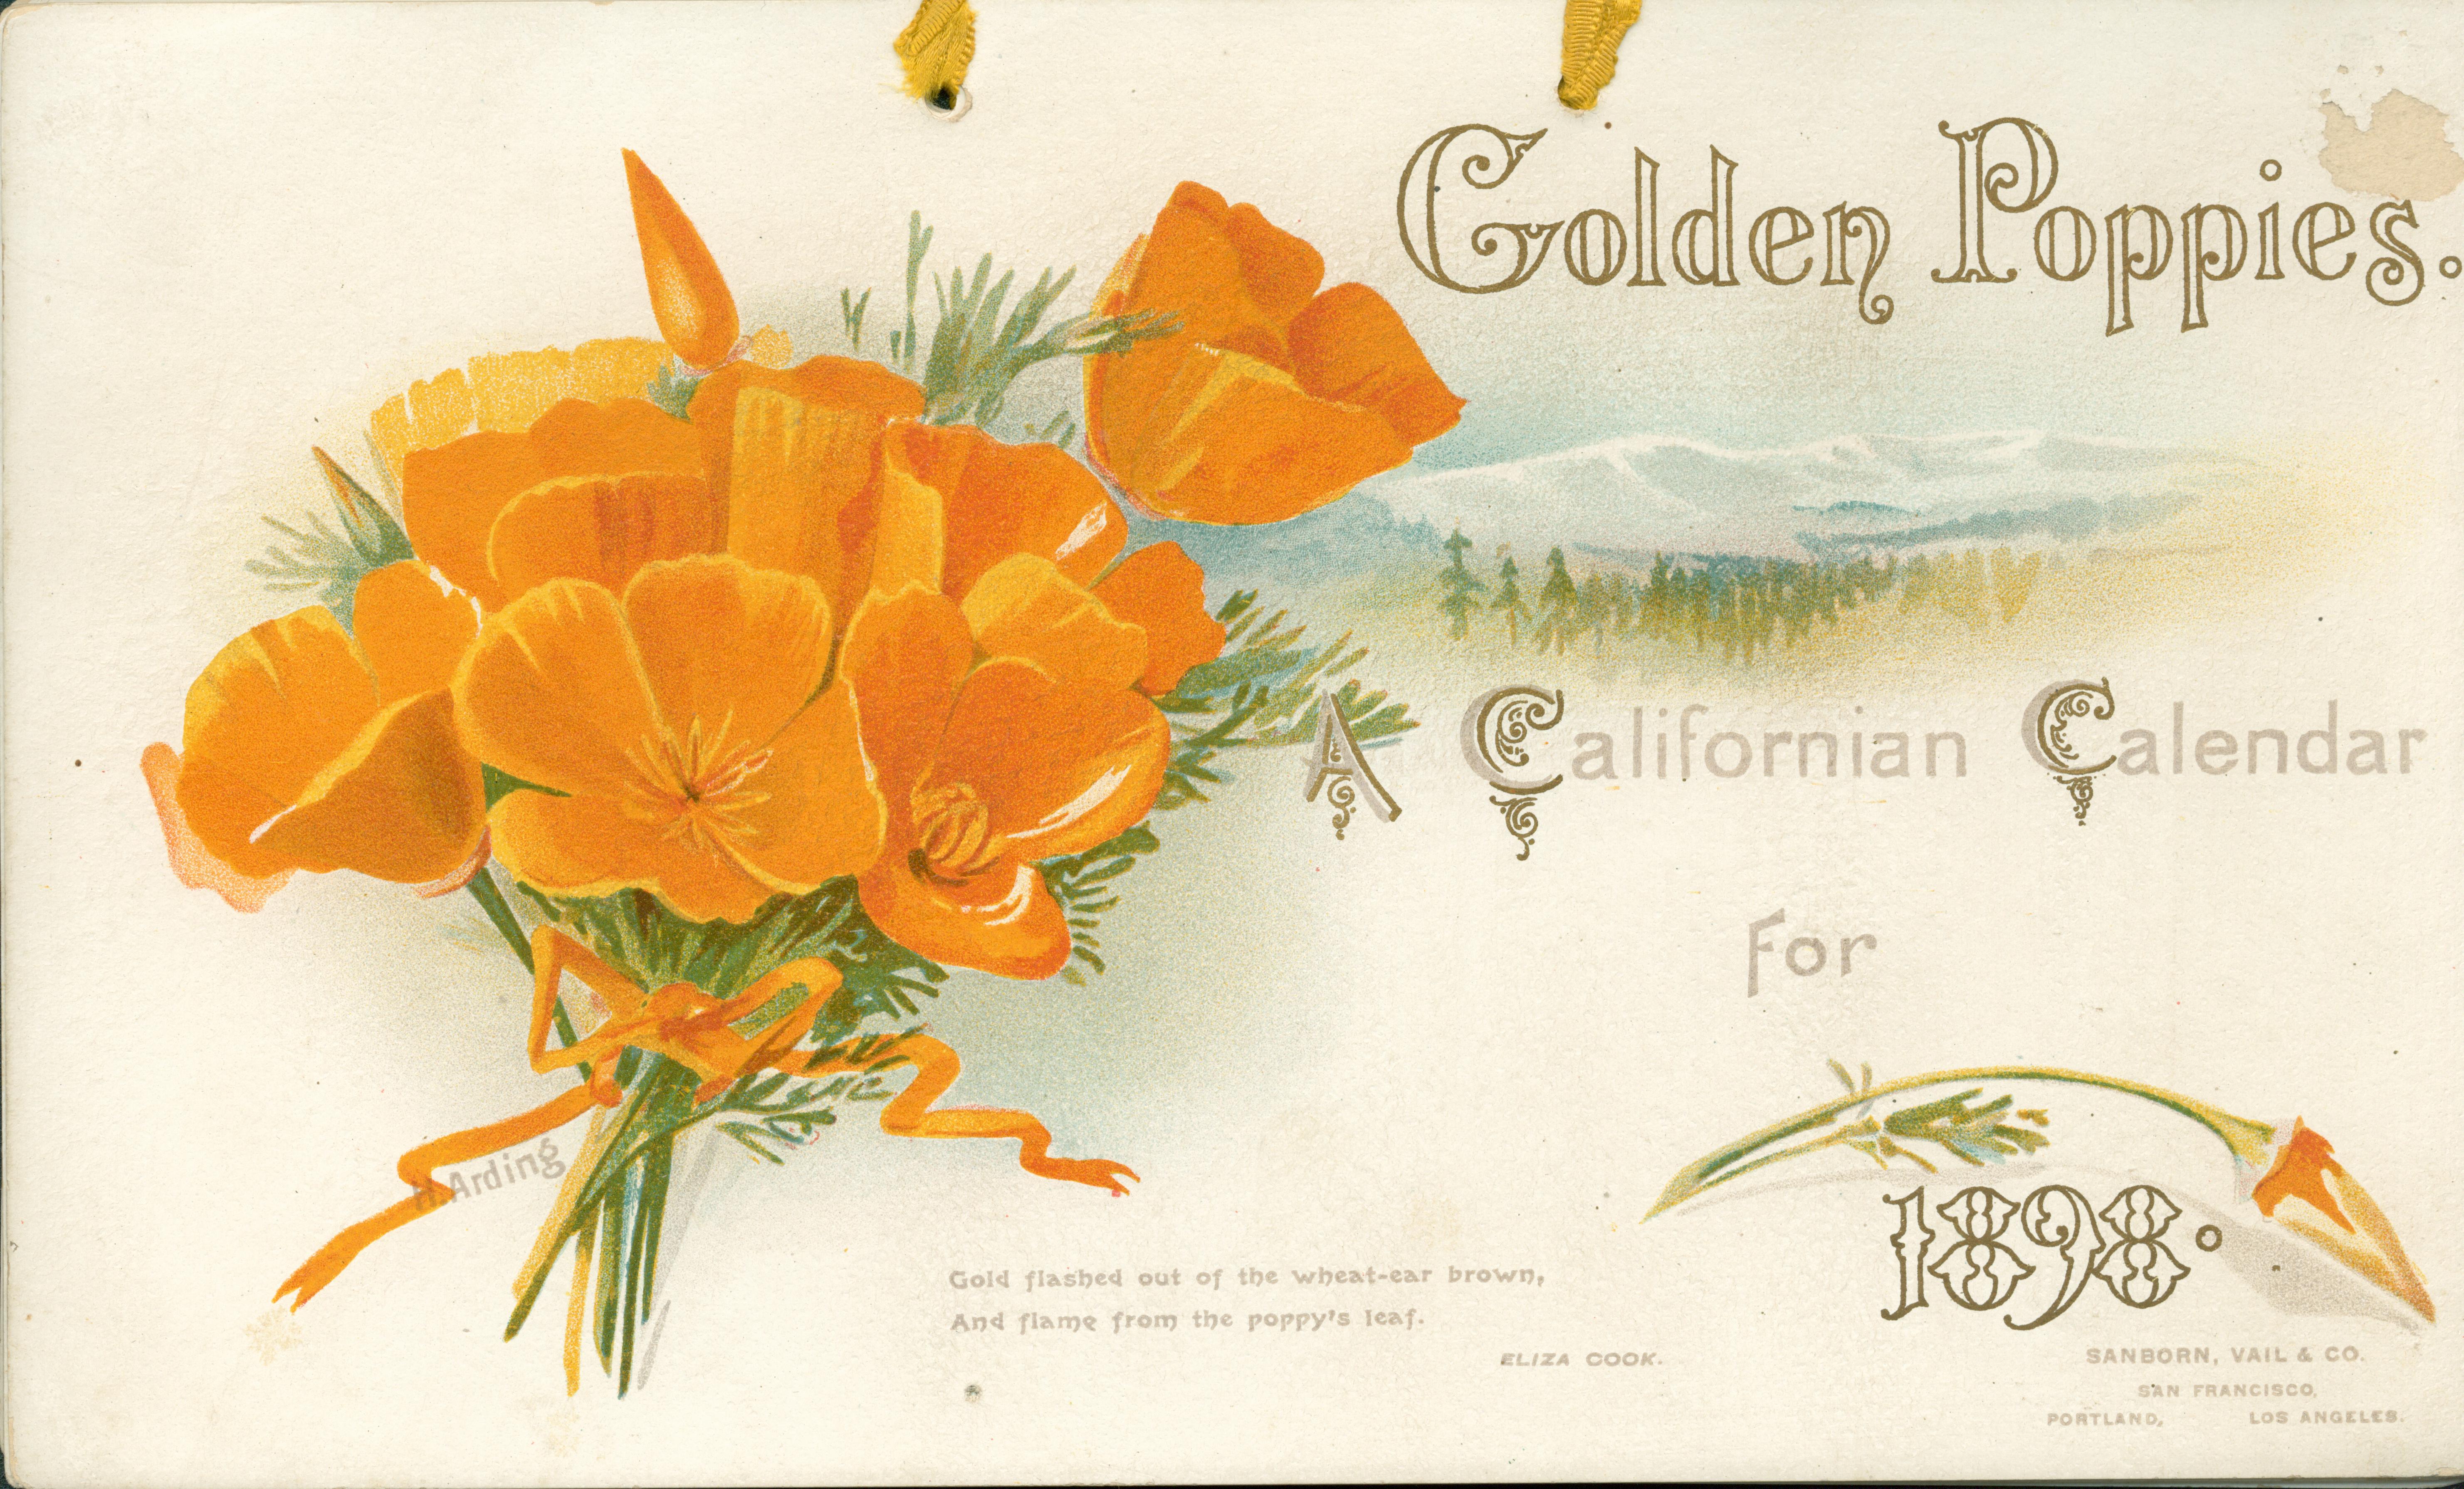 Cover shows a bouquet of poppies with a mountain scene in the background